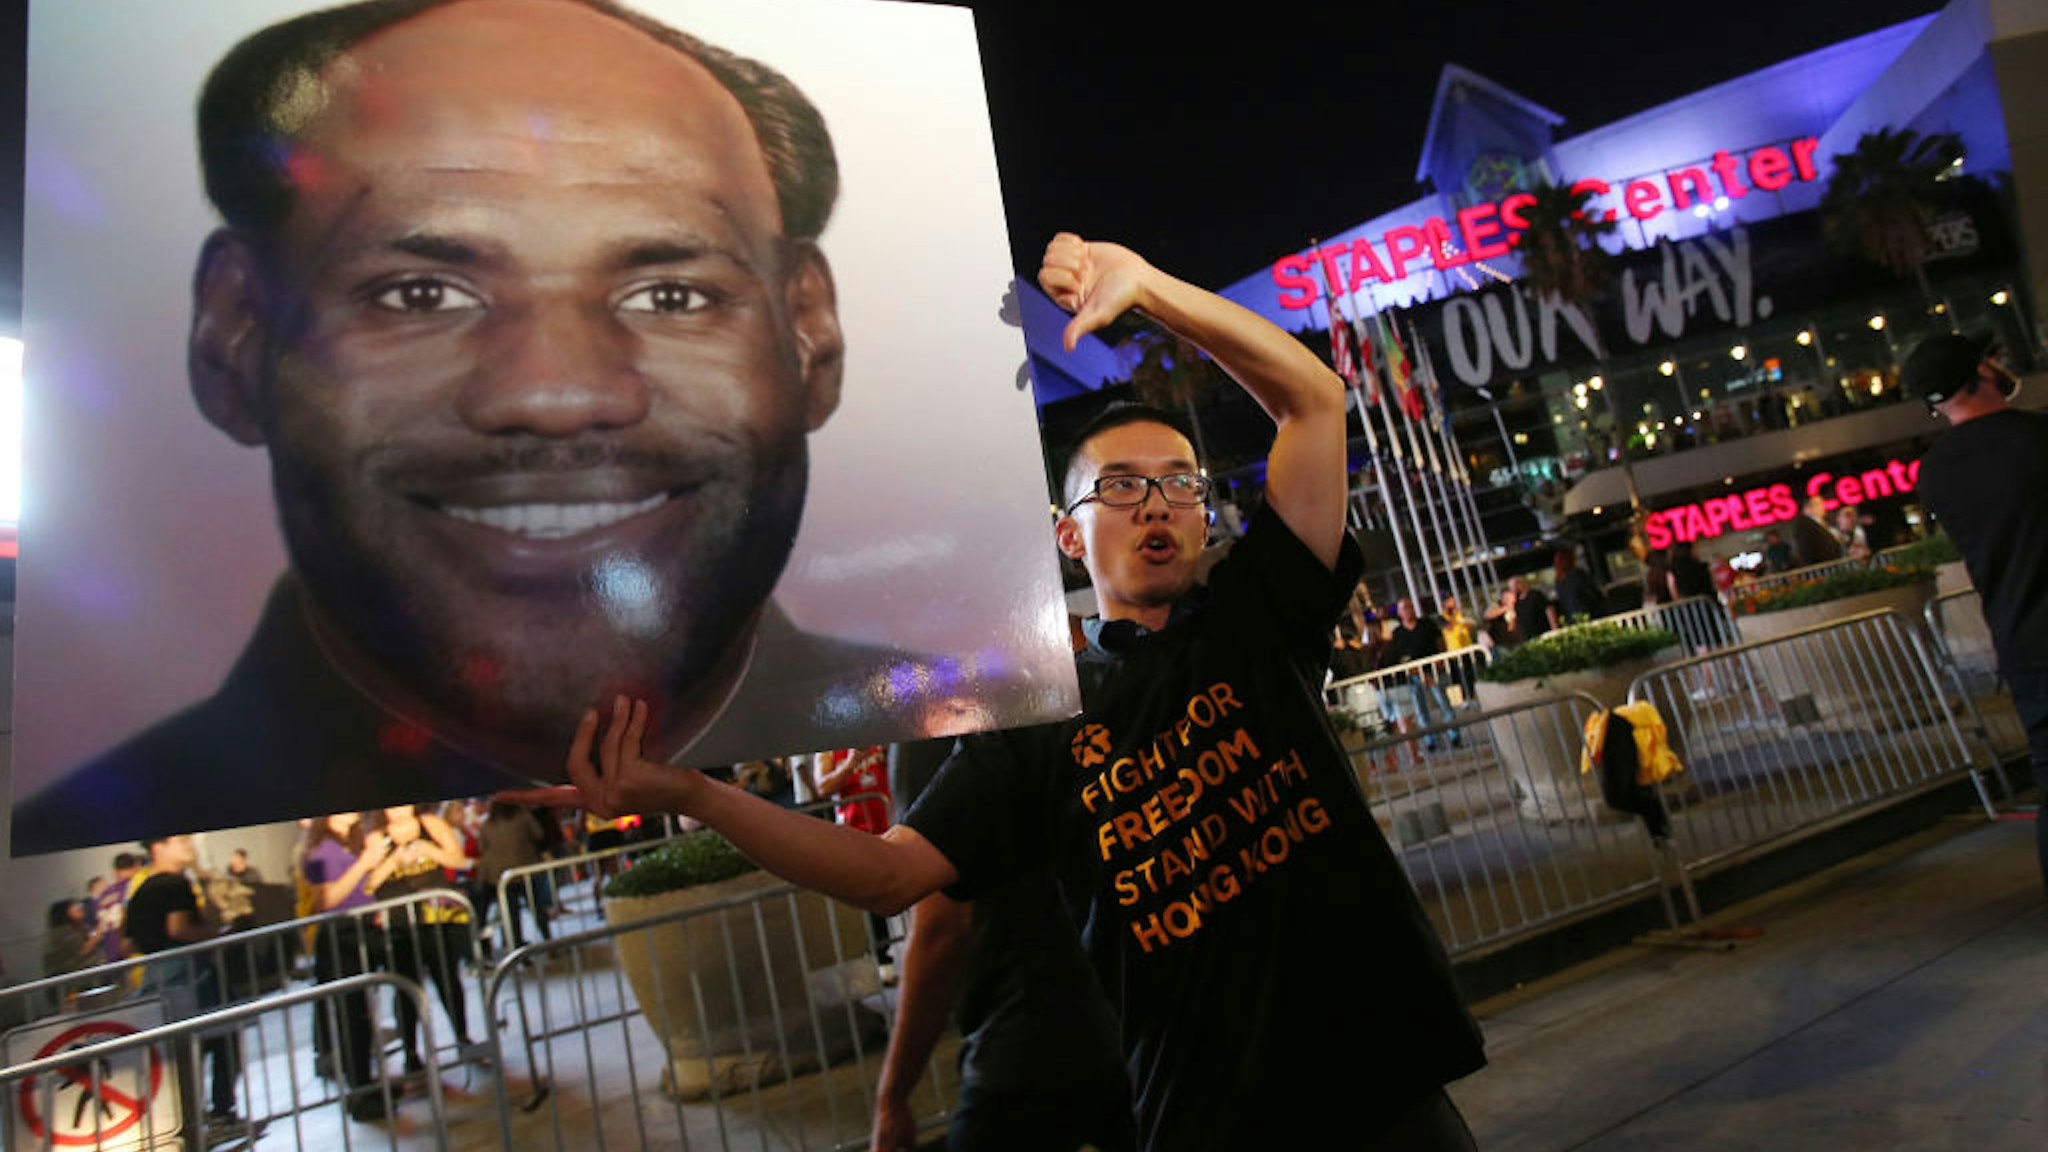 LOS ANGELES, CALIFORNIA - OCTOBER 22: A pro-Hong Kong activist holds a photo depicting LeBron James as Chinese communist revolutionary Chairman Mao Zedong before the Los Angeles Lakers season opening game against the LA Clippers, outside Staples Center, on October 22, 2019 in Los Angeles, California. Activists also printed 16,000 pro-Hong Kong t-shirts to hand out to those attending the game and encouraged them to wear the free shirts as a form of peaceful protest against China amidst Chinese censorship of NBA games. (Photo by Mario Tama/Getty Images)